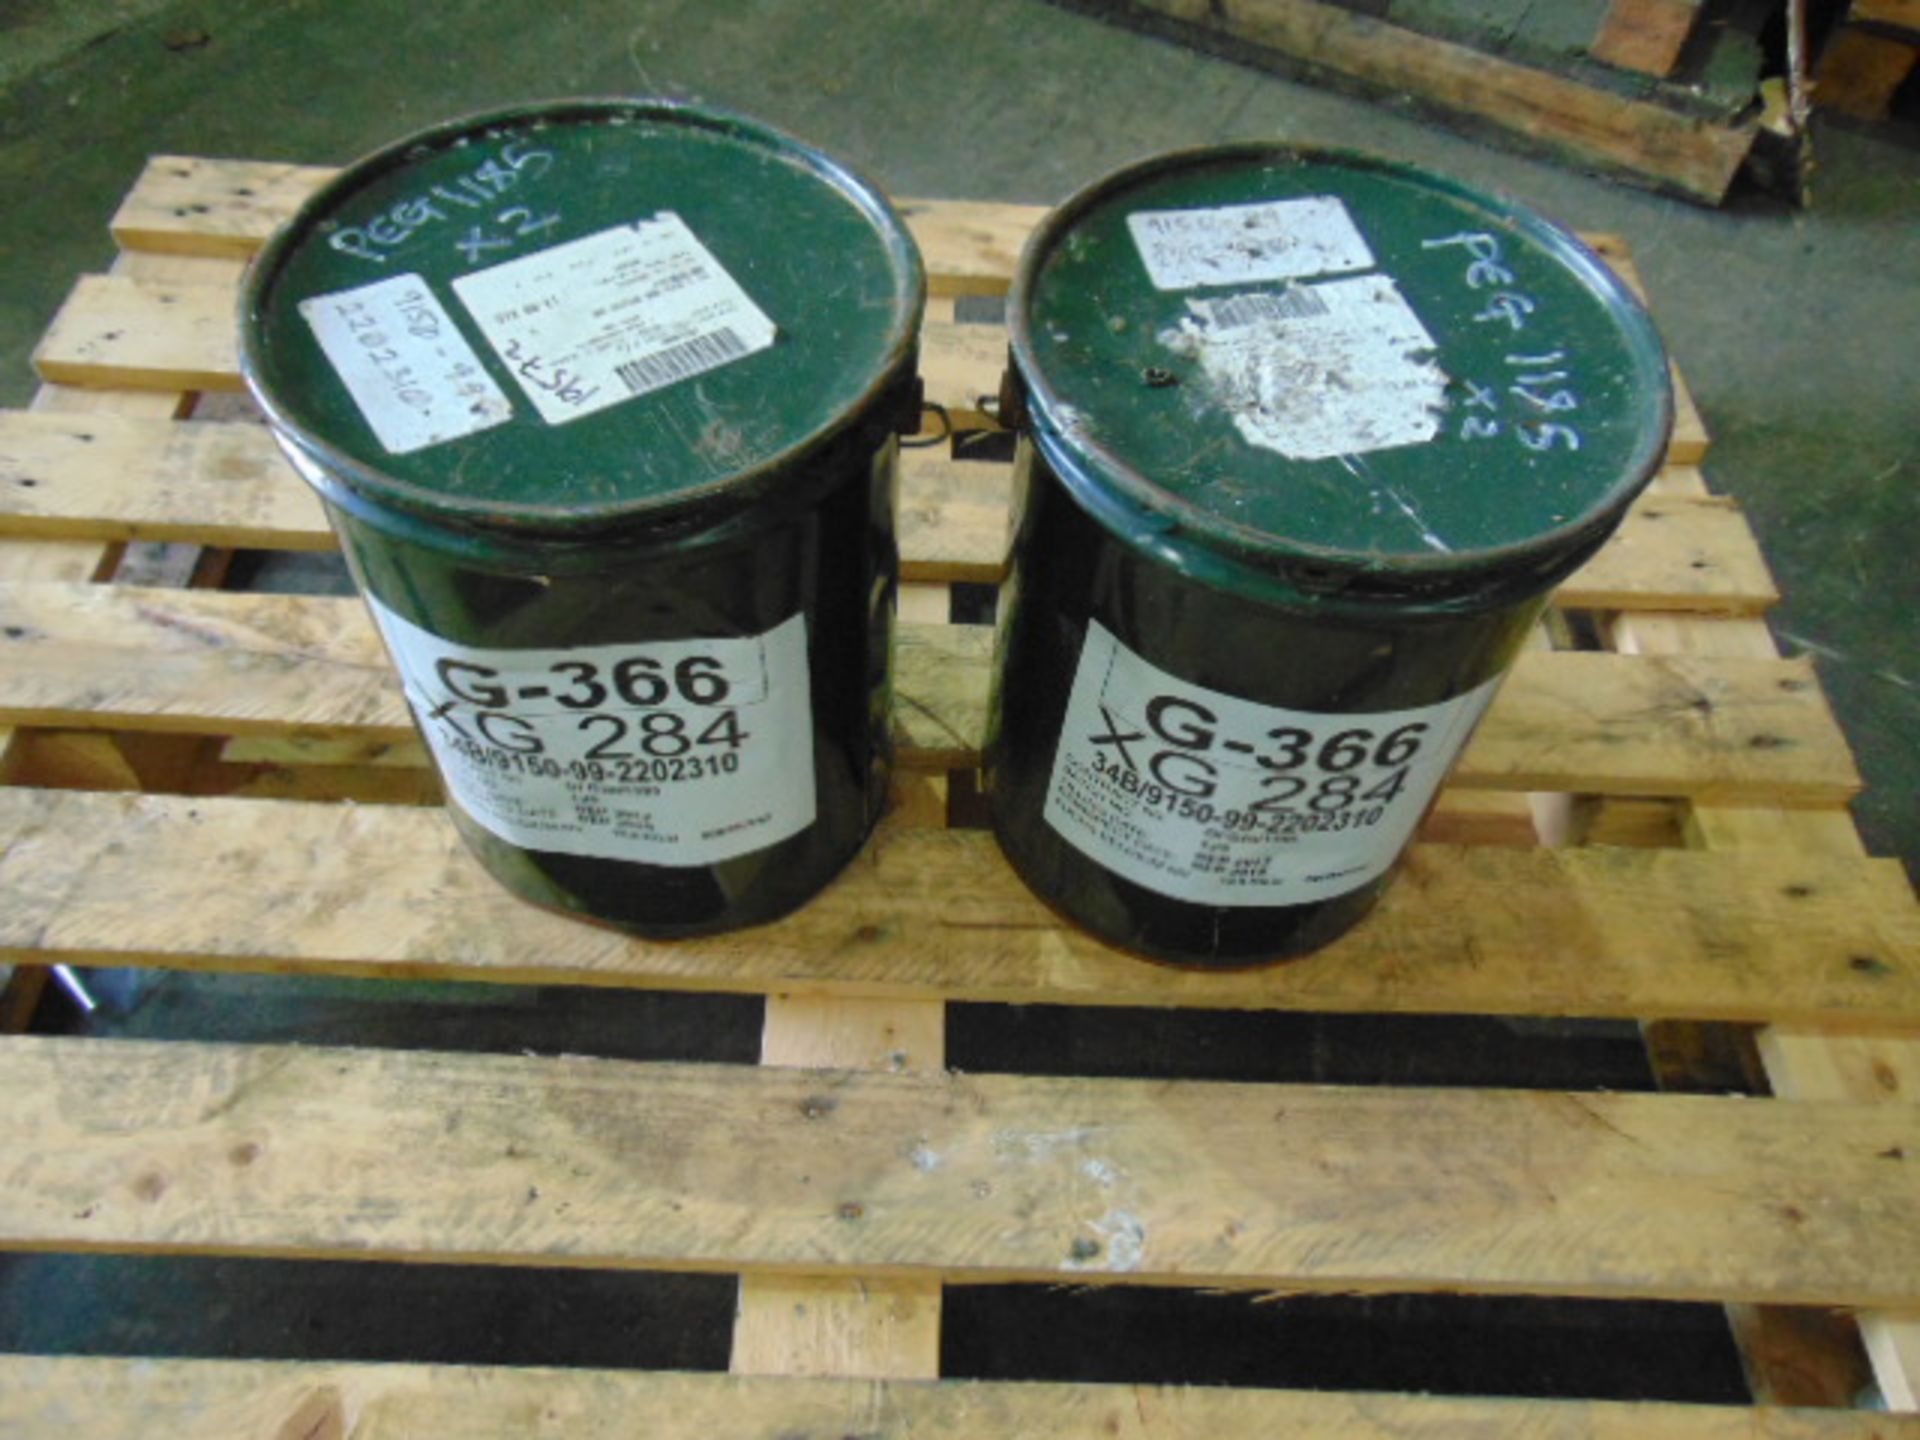 Qty 2 x 12.5Kg G-366/XG-284 Oscillating Bearing Grease direct from reserve stores